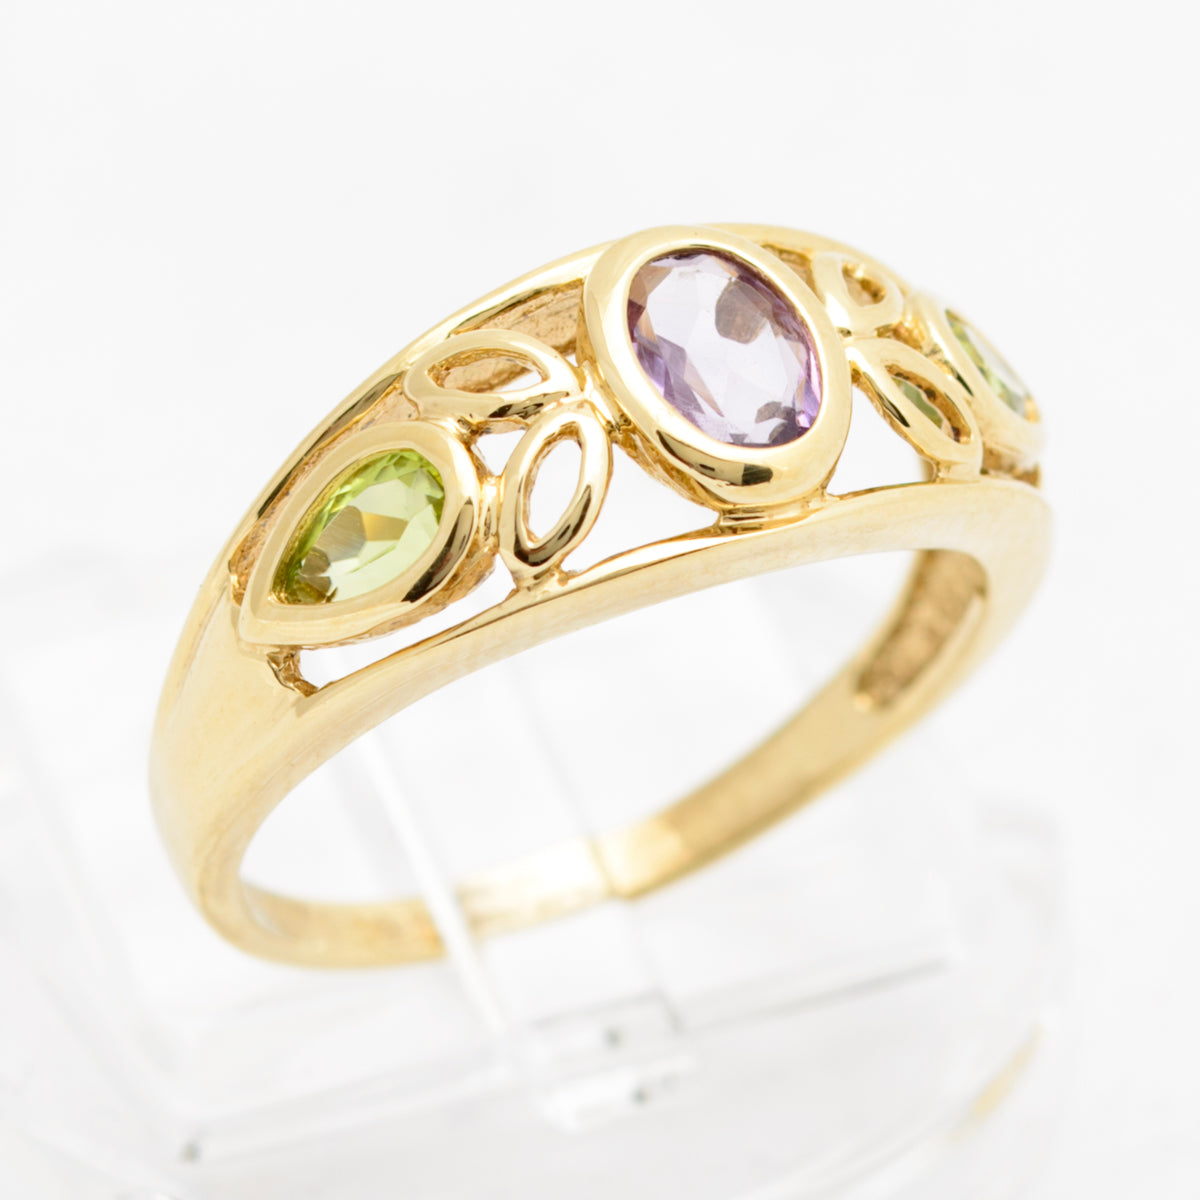 9ct Gold Trilogy Ring With Amethyst Gemstone & 2 Peridots With Open Work (A1753)